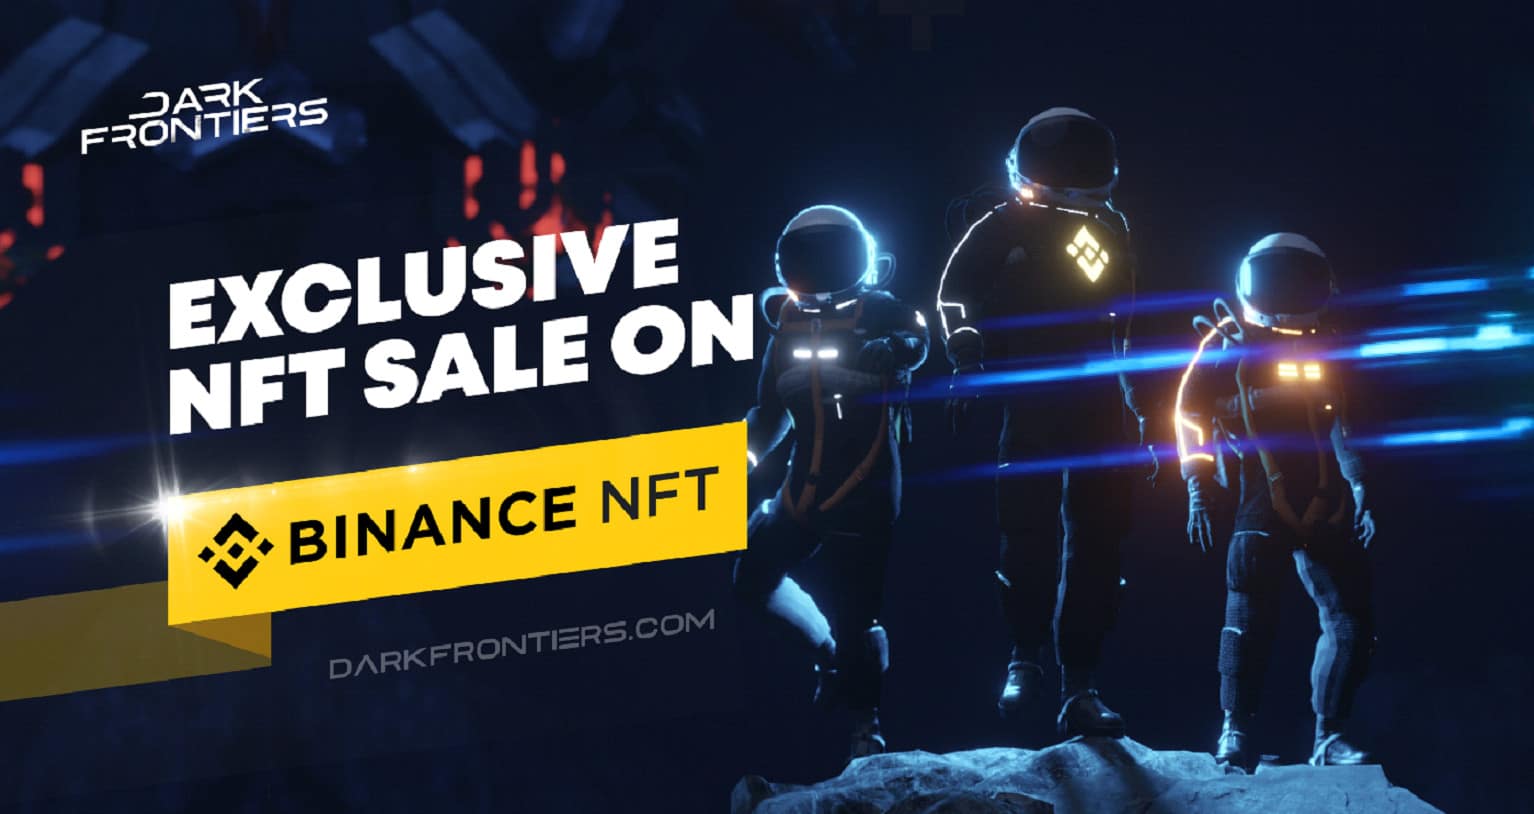 Dark-frontiers-limited-edition-spacesuit-sale-on-binance-nft